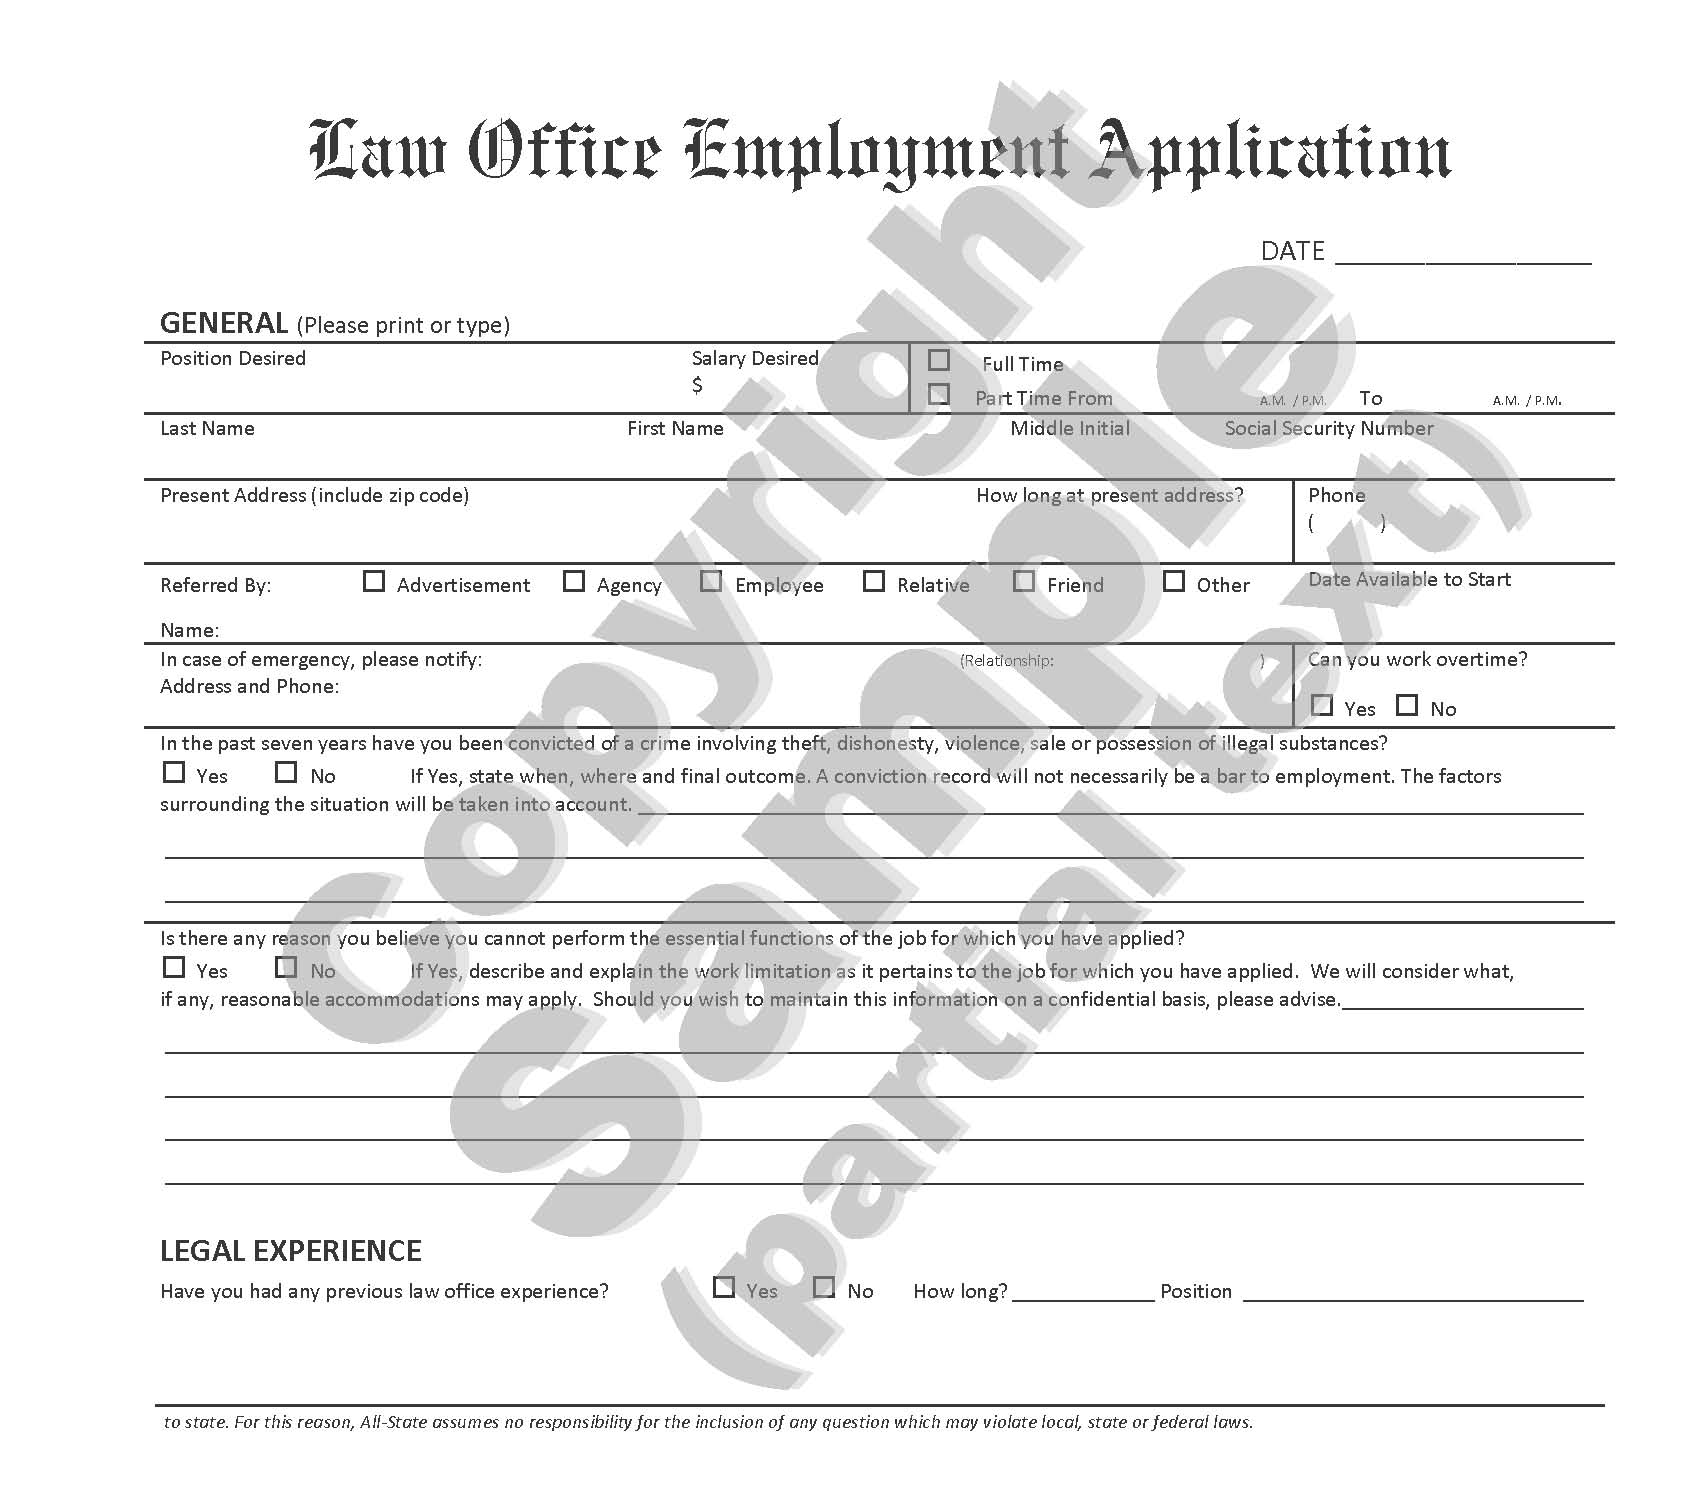 Law Office Employment Application